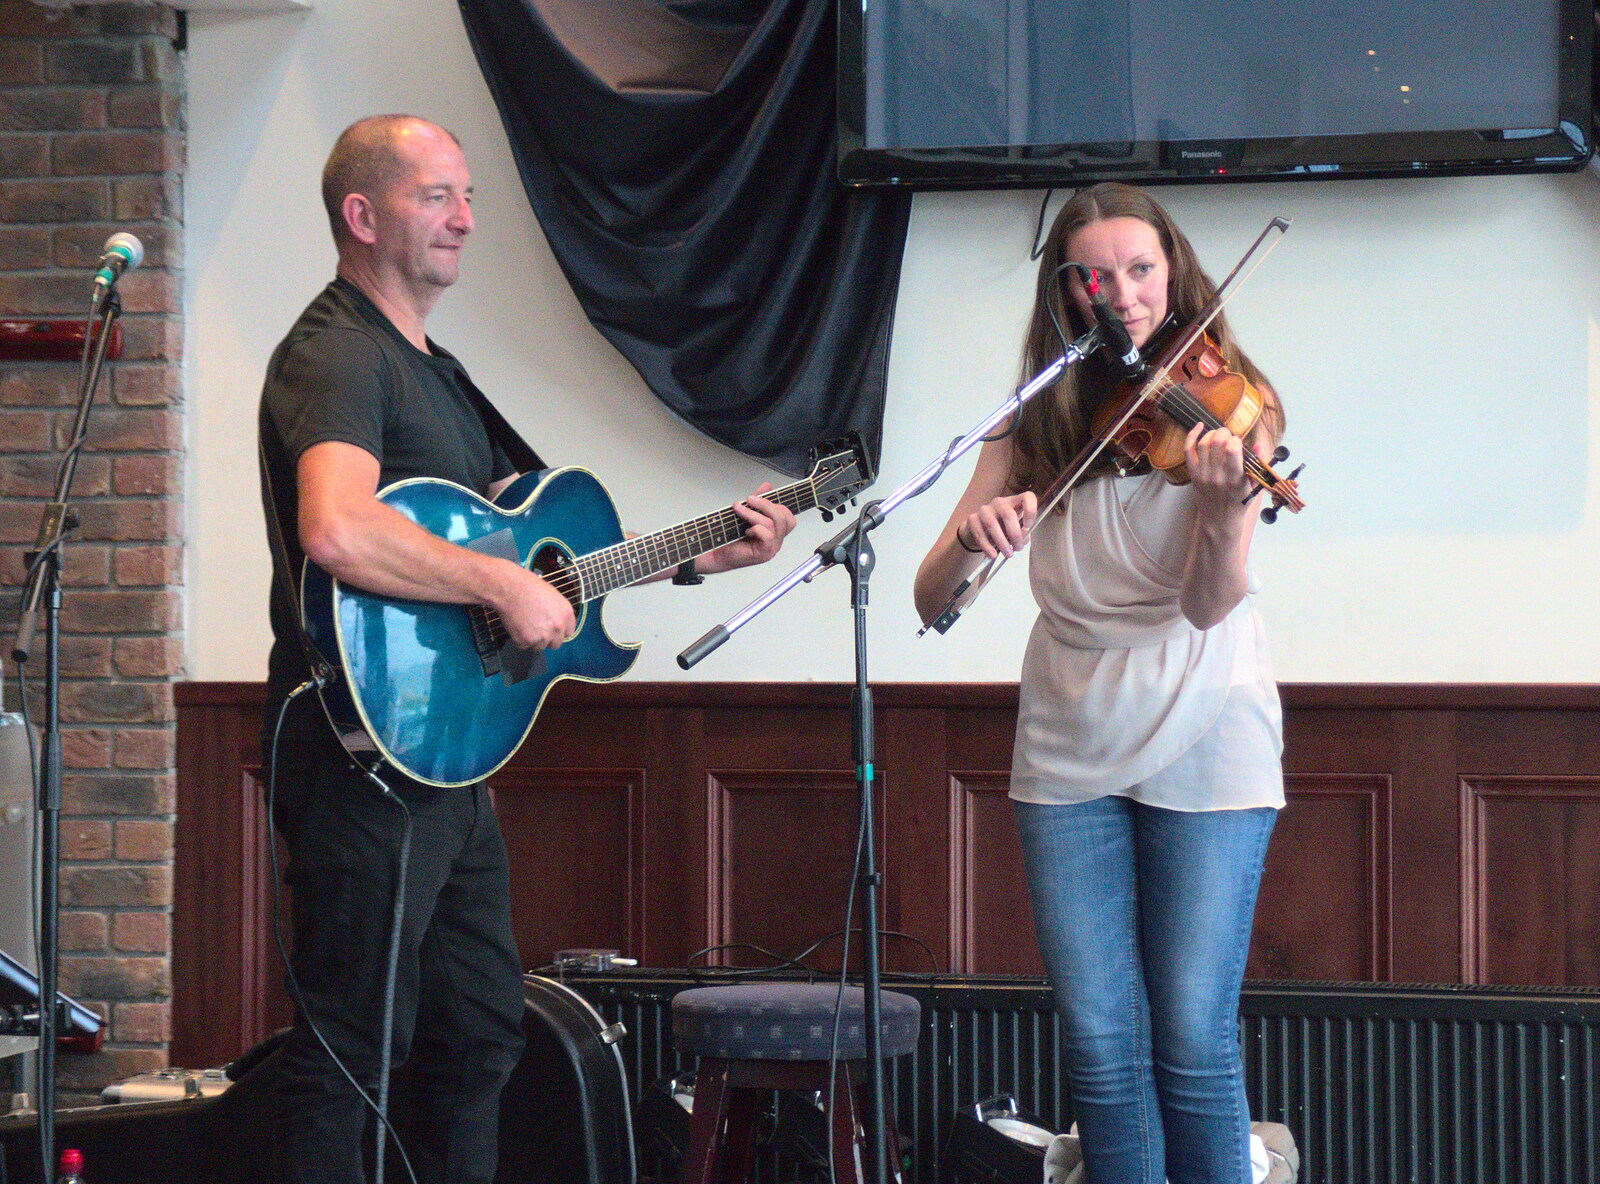 Guitar and fiddle from Liverpool to Baile an Sceilg, County Kerry, Ireland - 30th July 2017